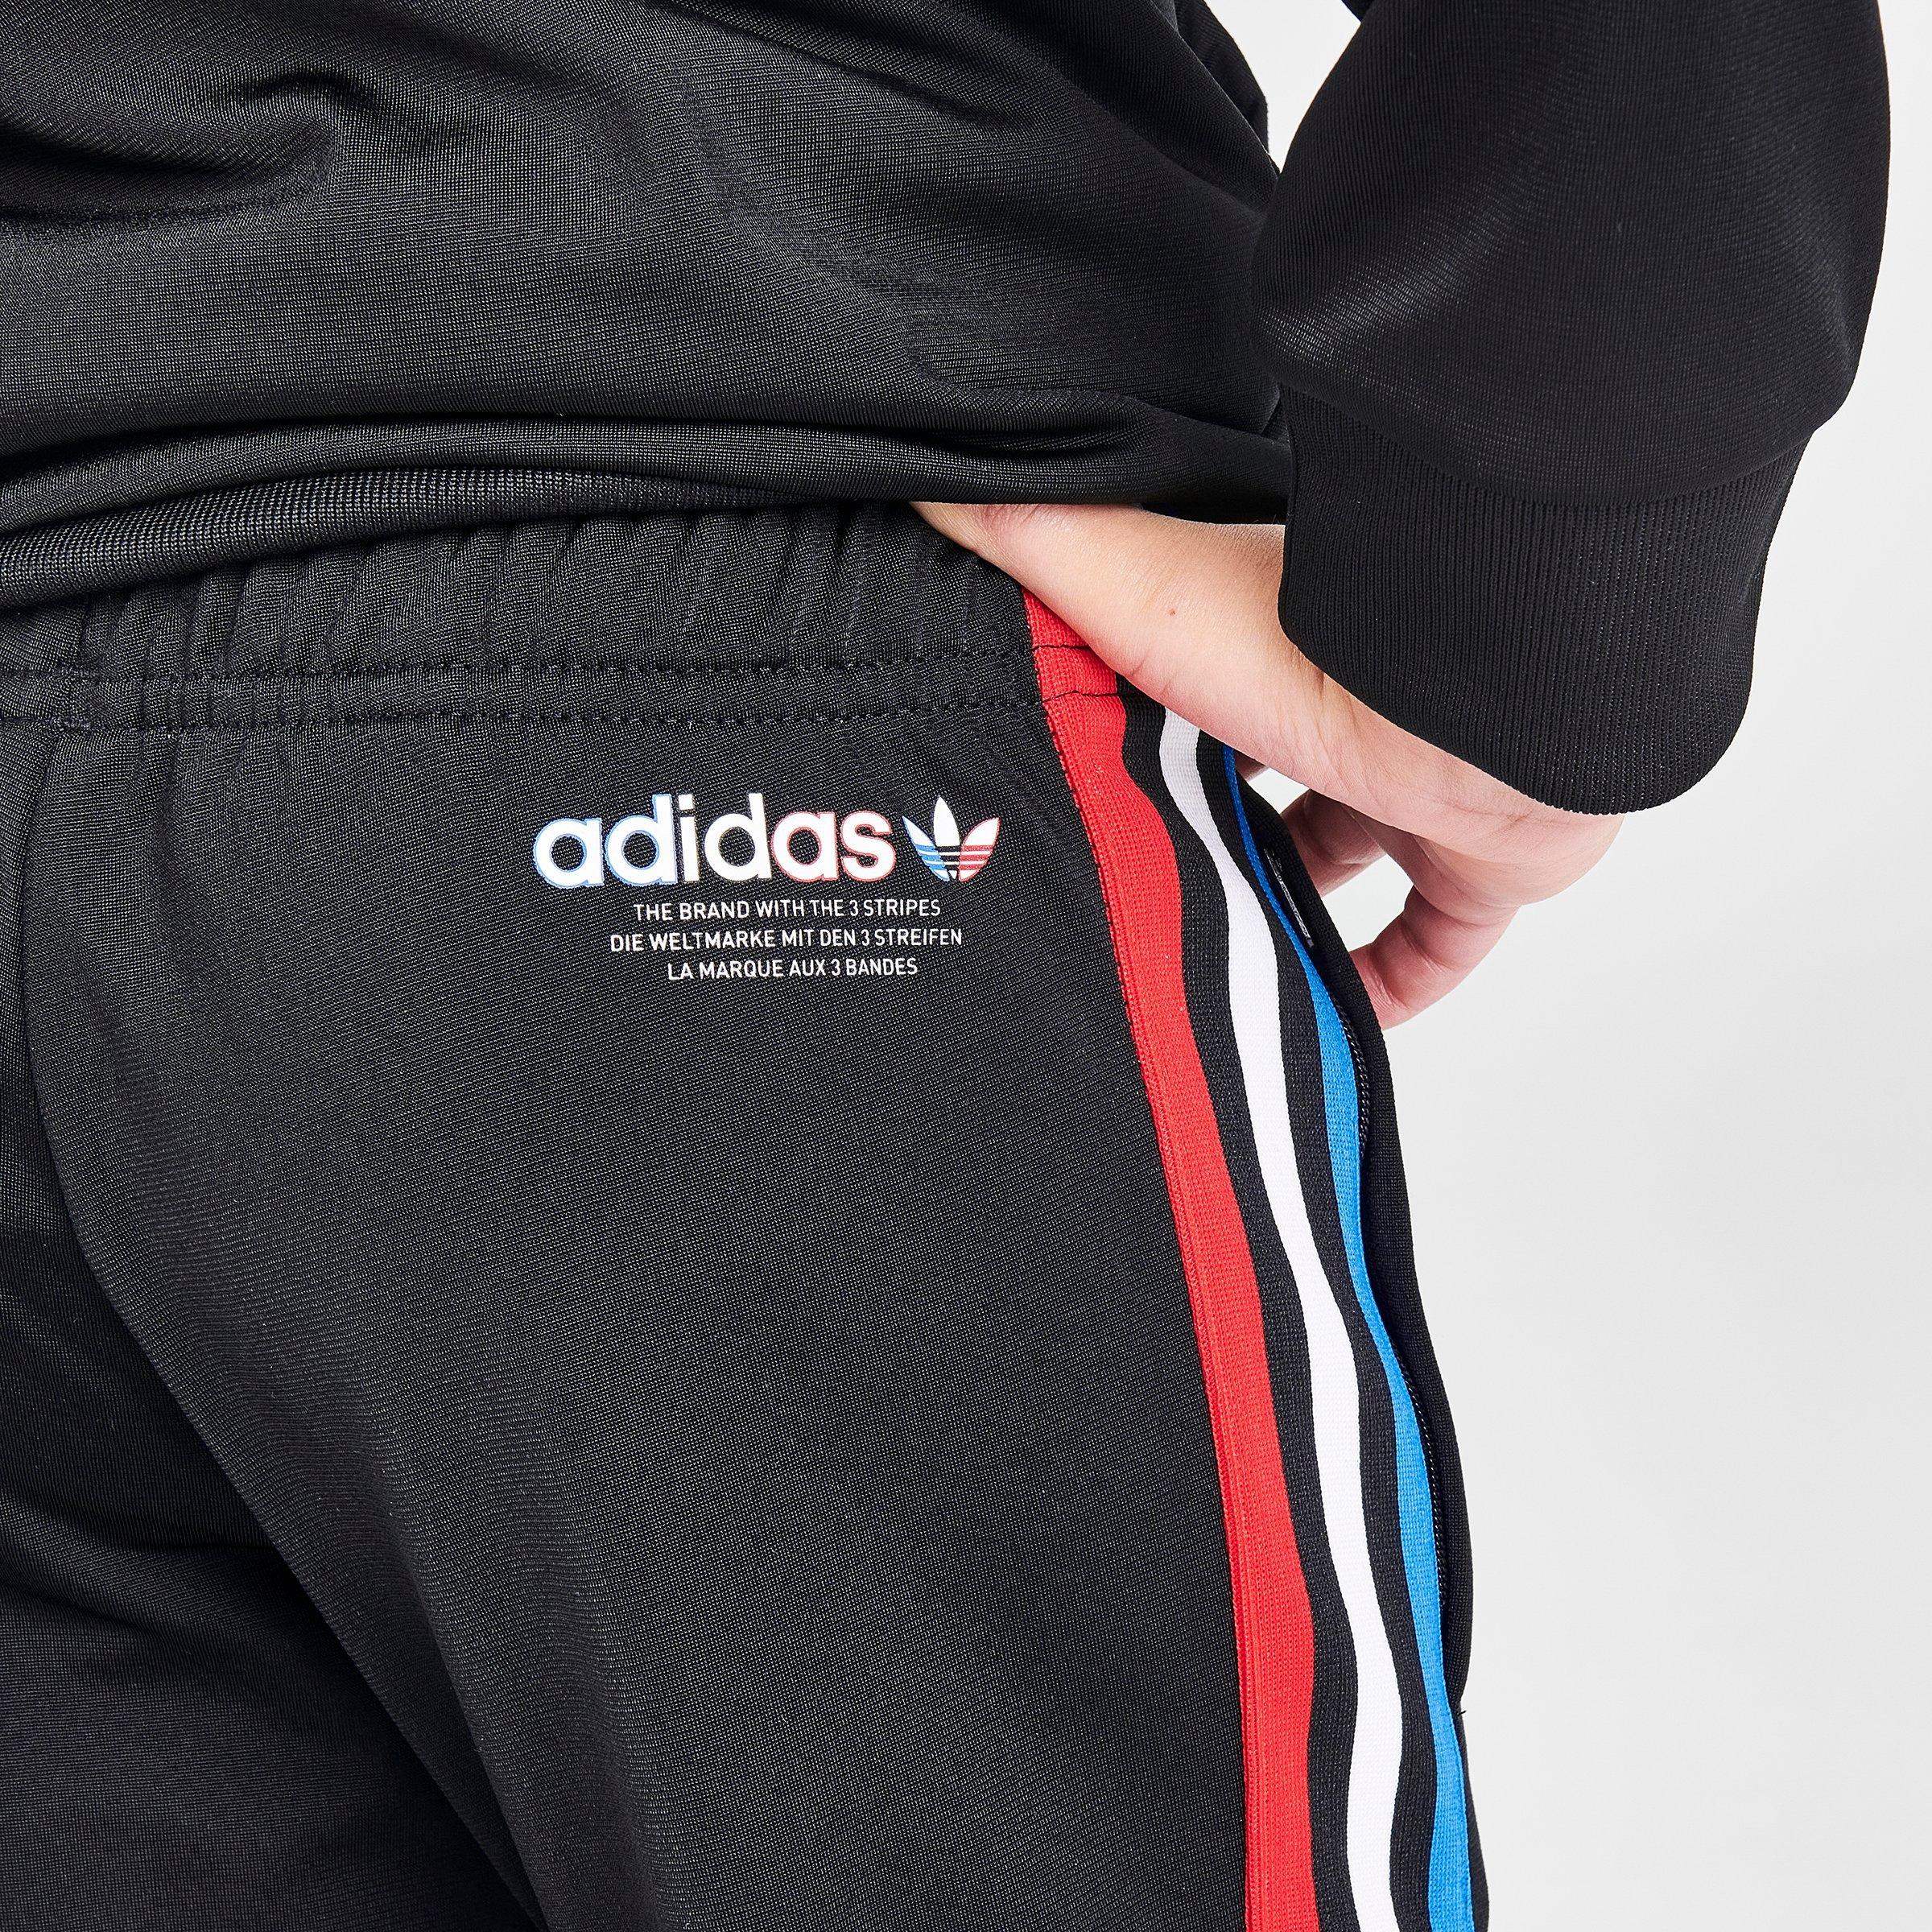 adidas jumpsuit youth